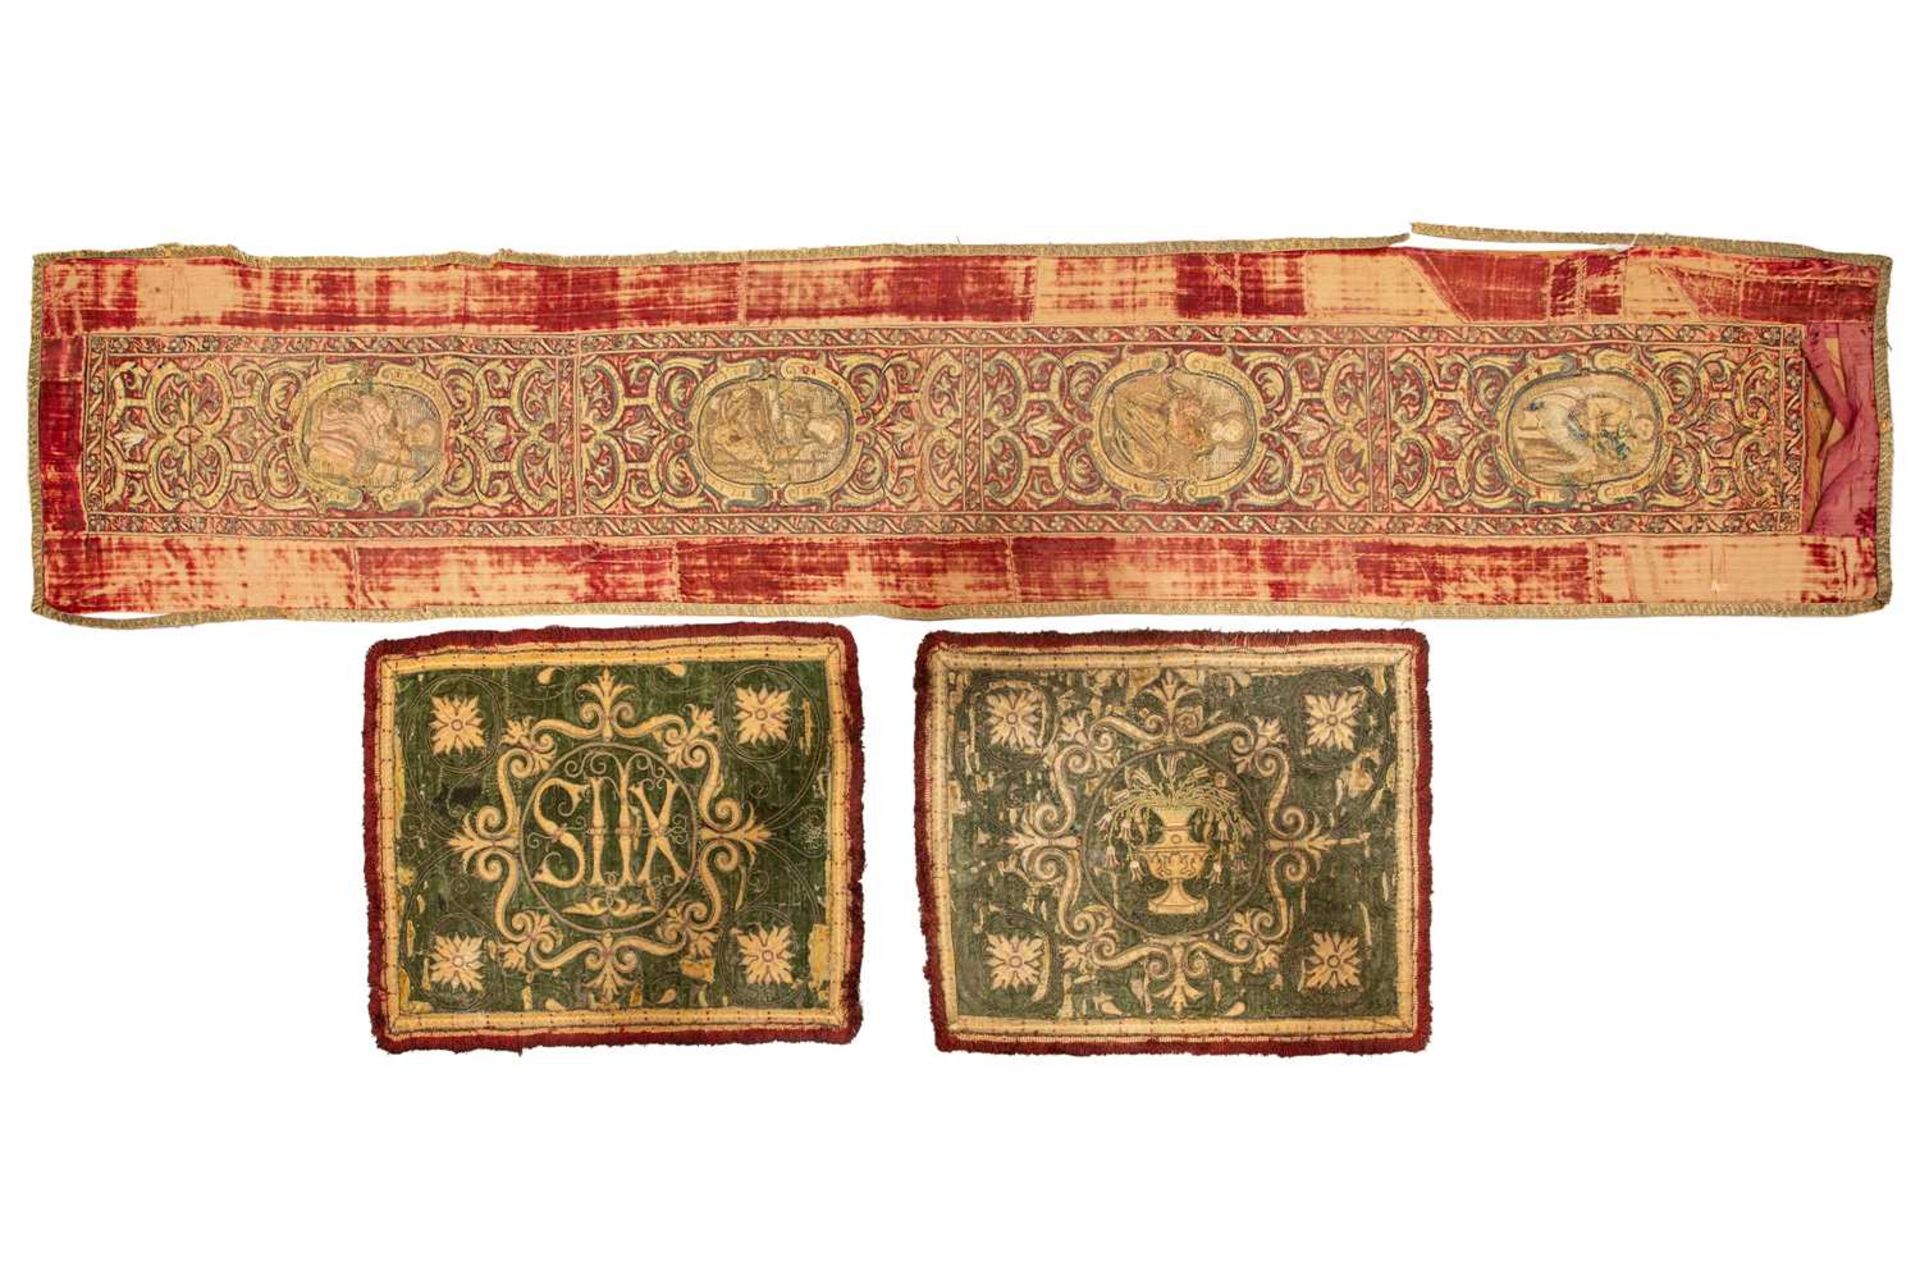 A pair of silk and velvet embroidered altar cloths, probably 18th century, 55 cm x 41 cm, together